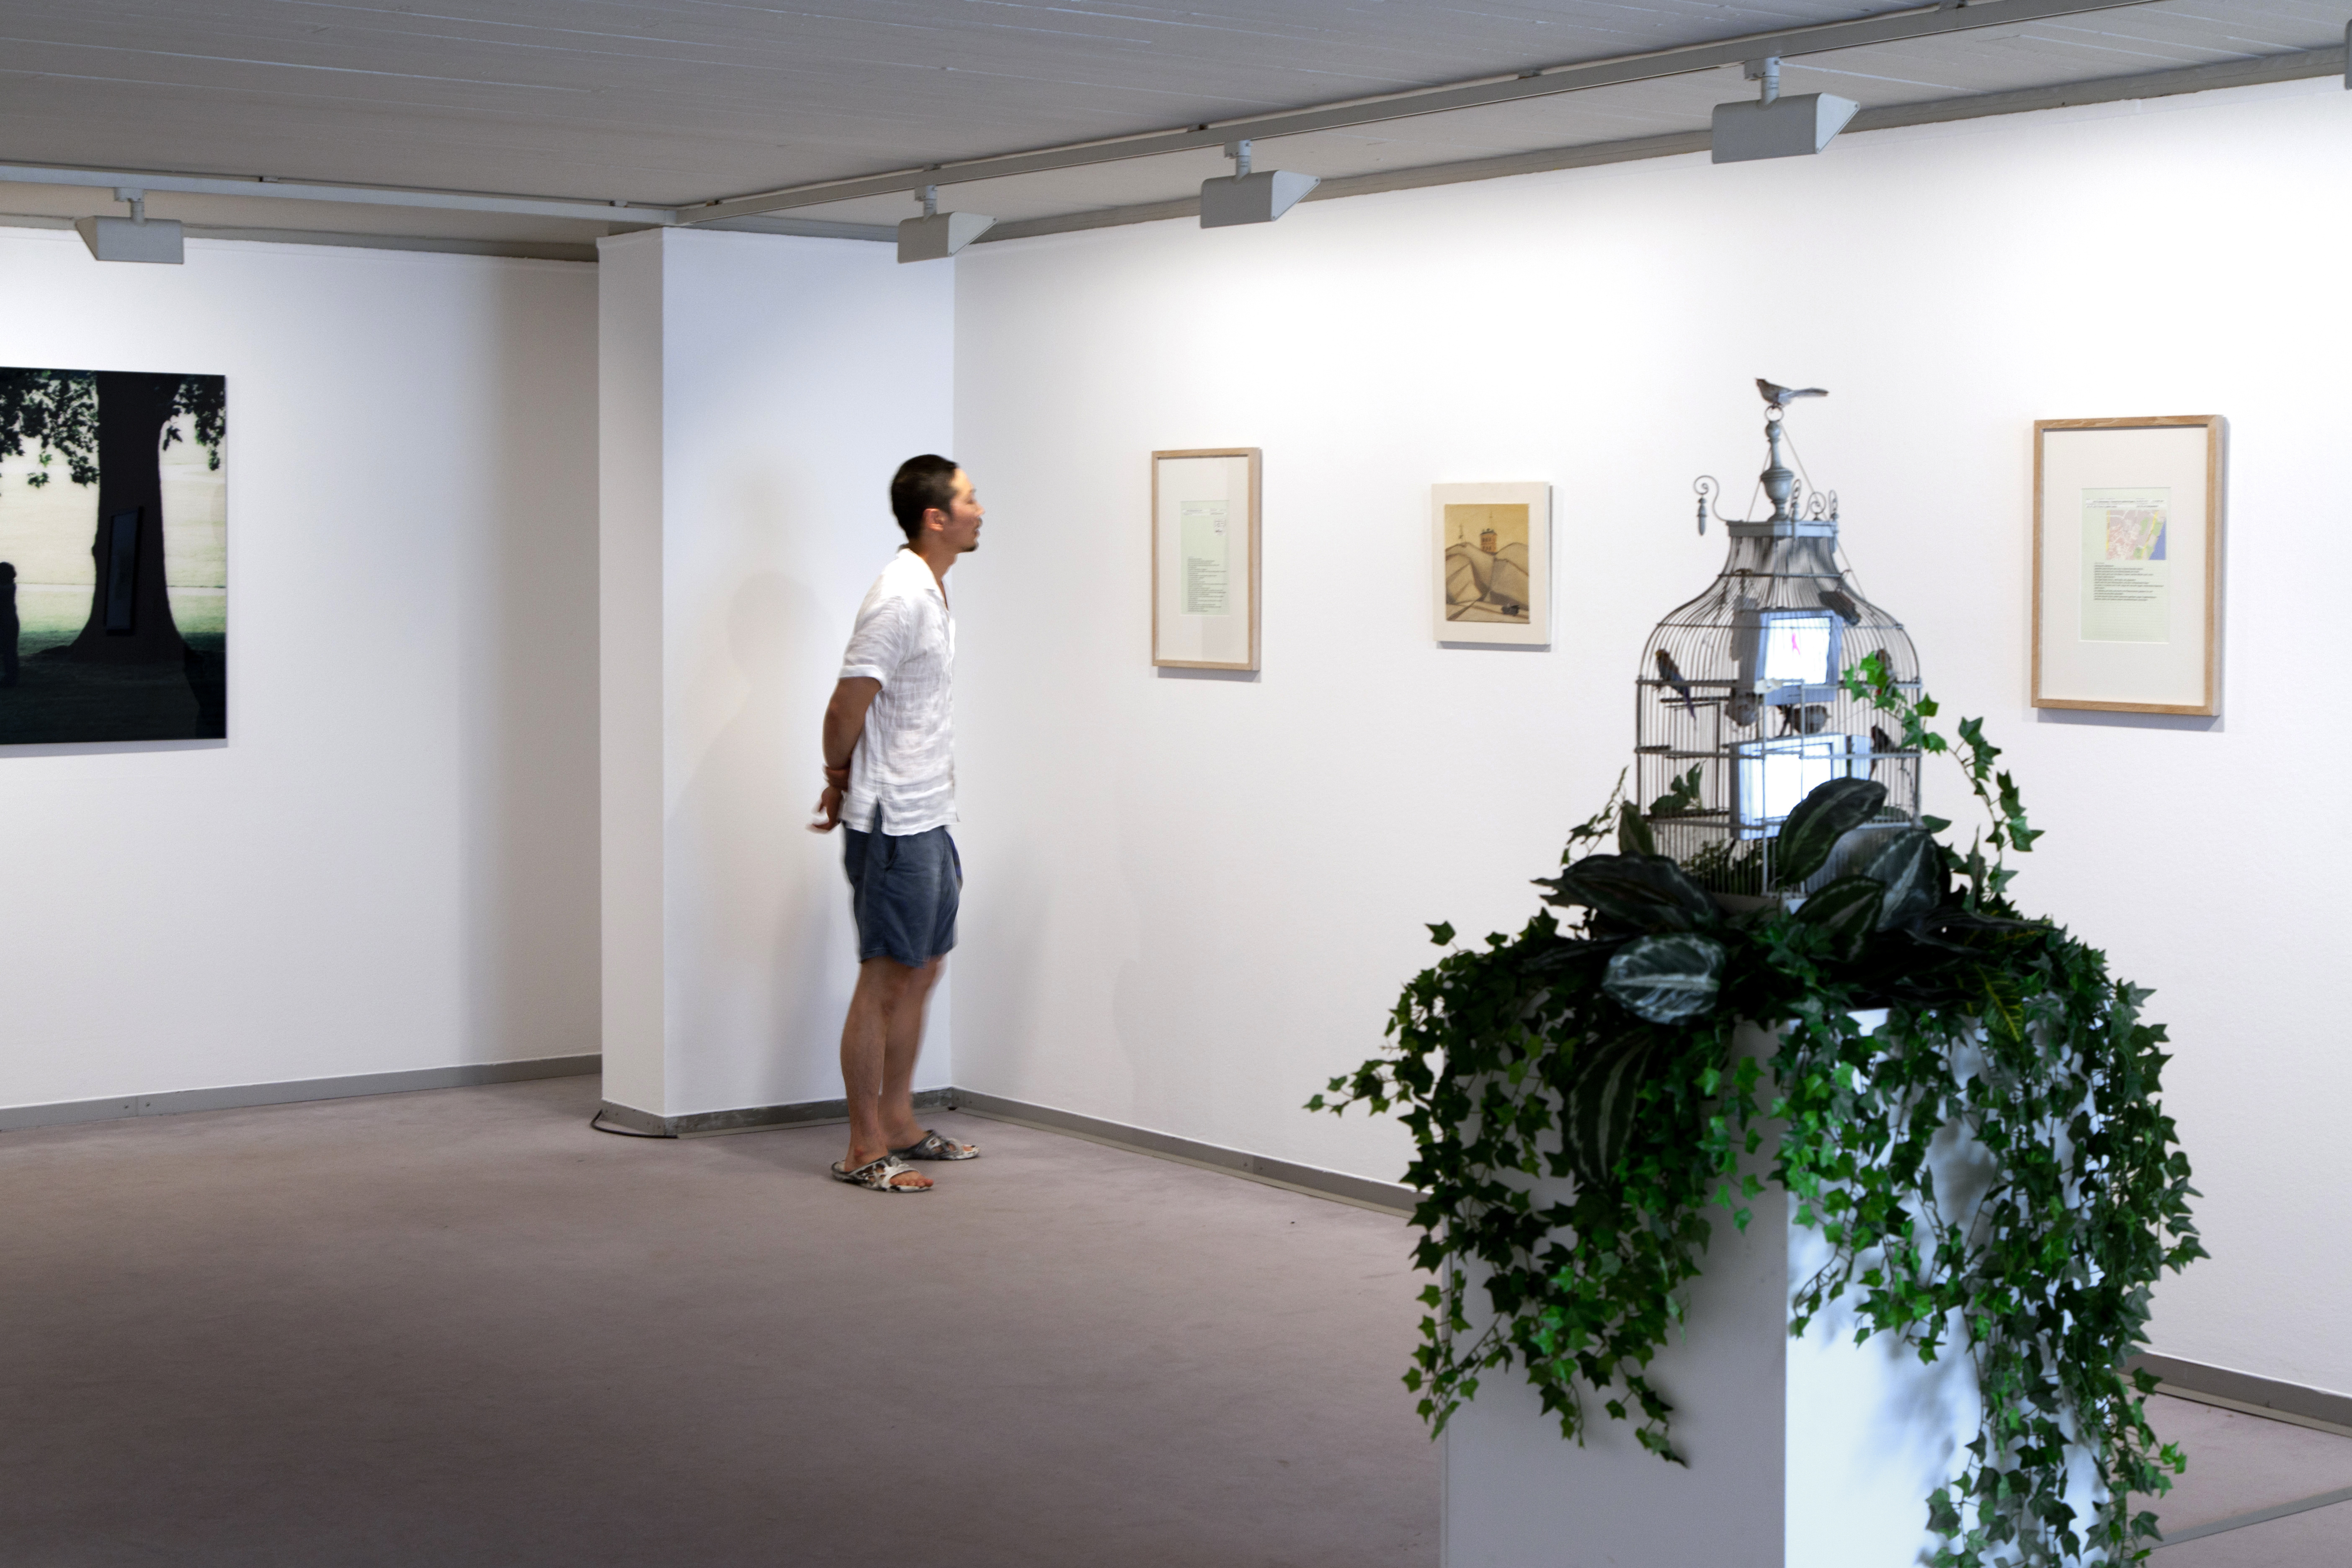 The endowed view in good company, Kunsthalle Kiel, 2012